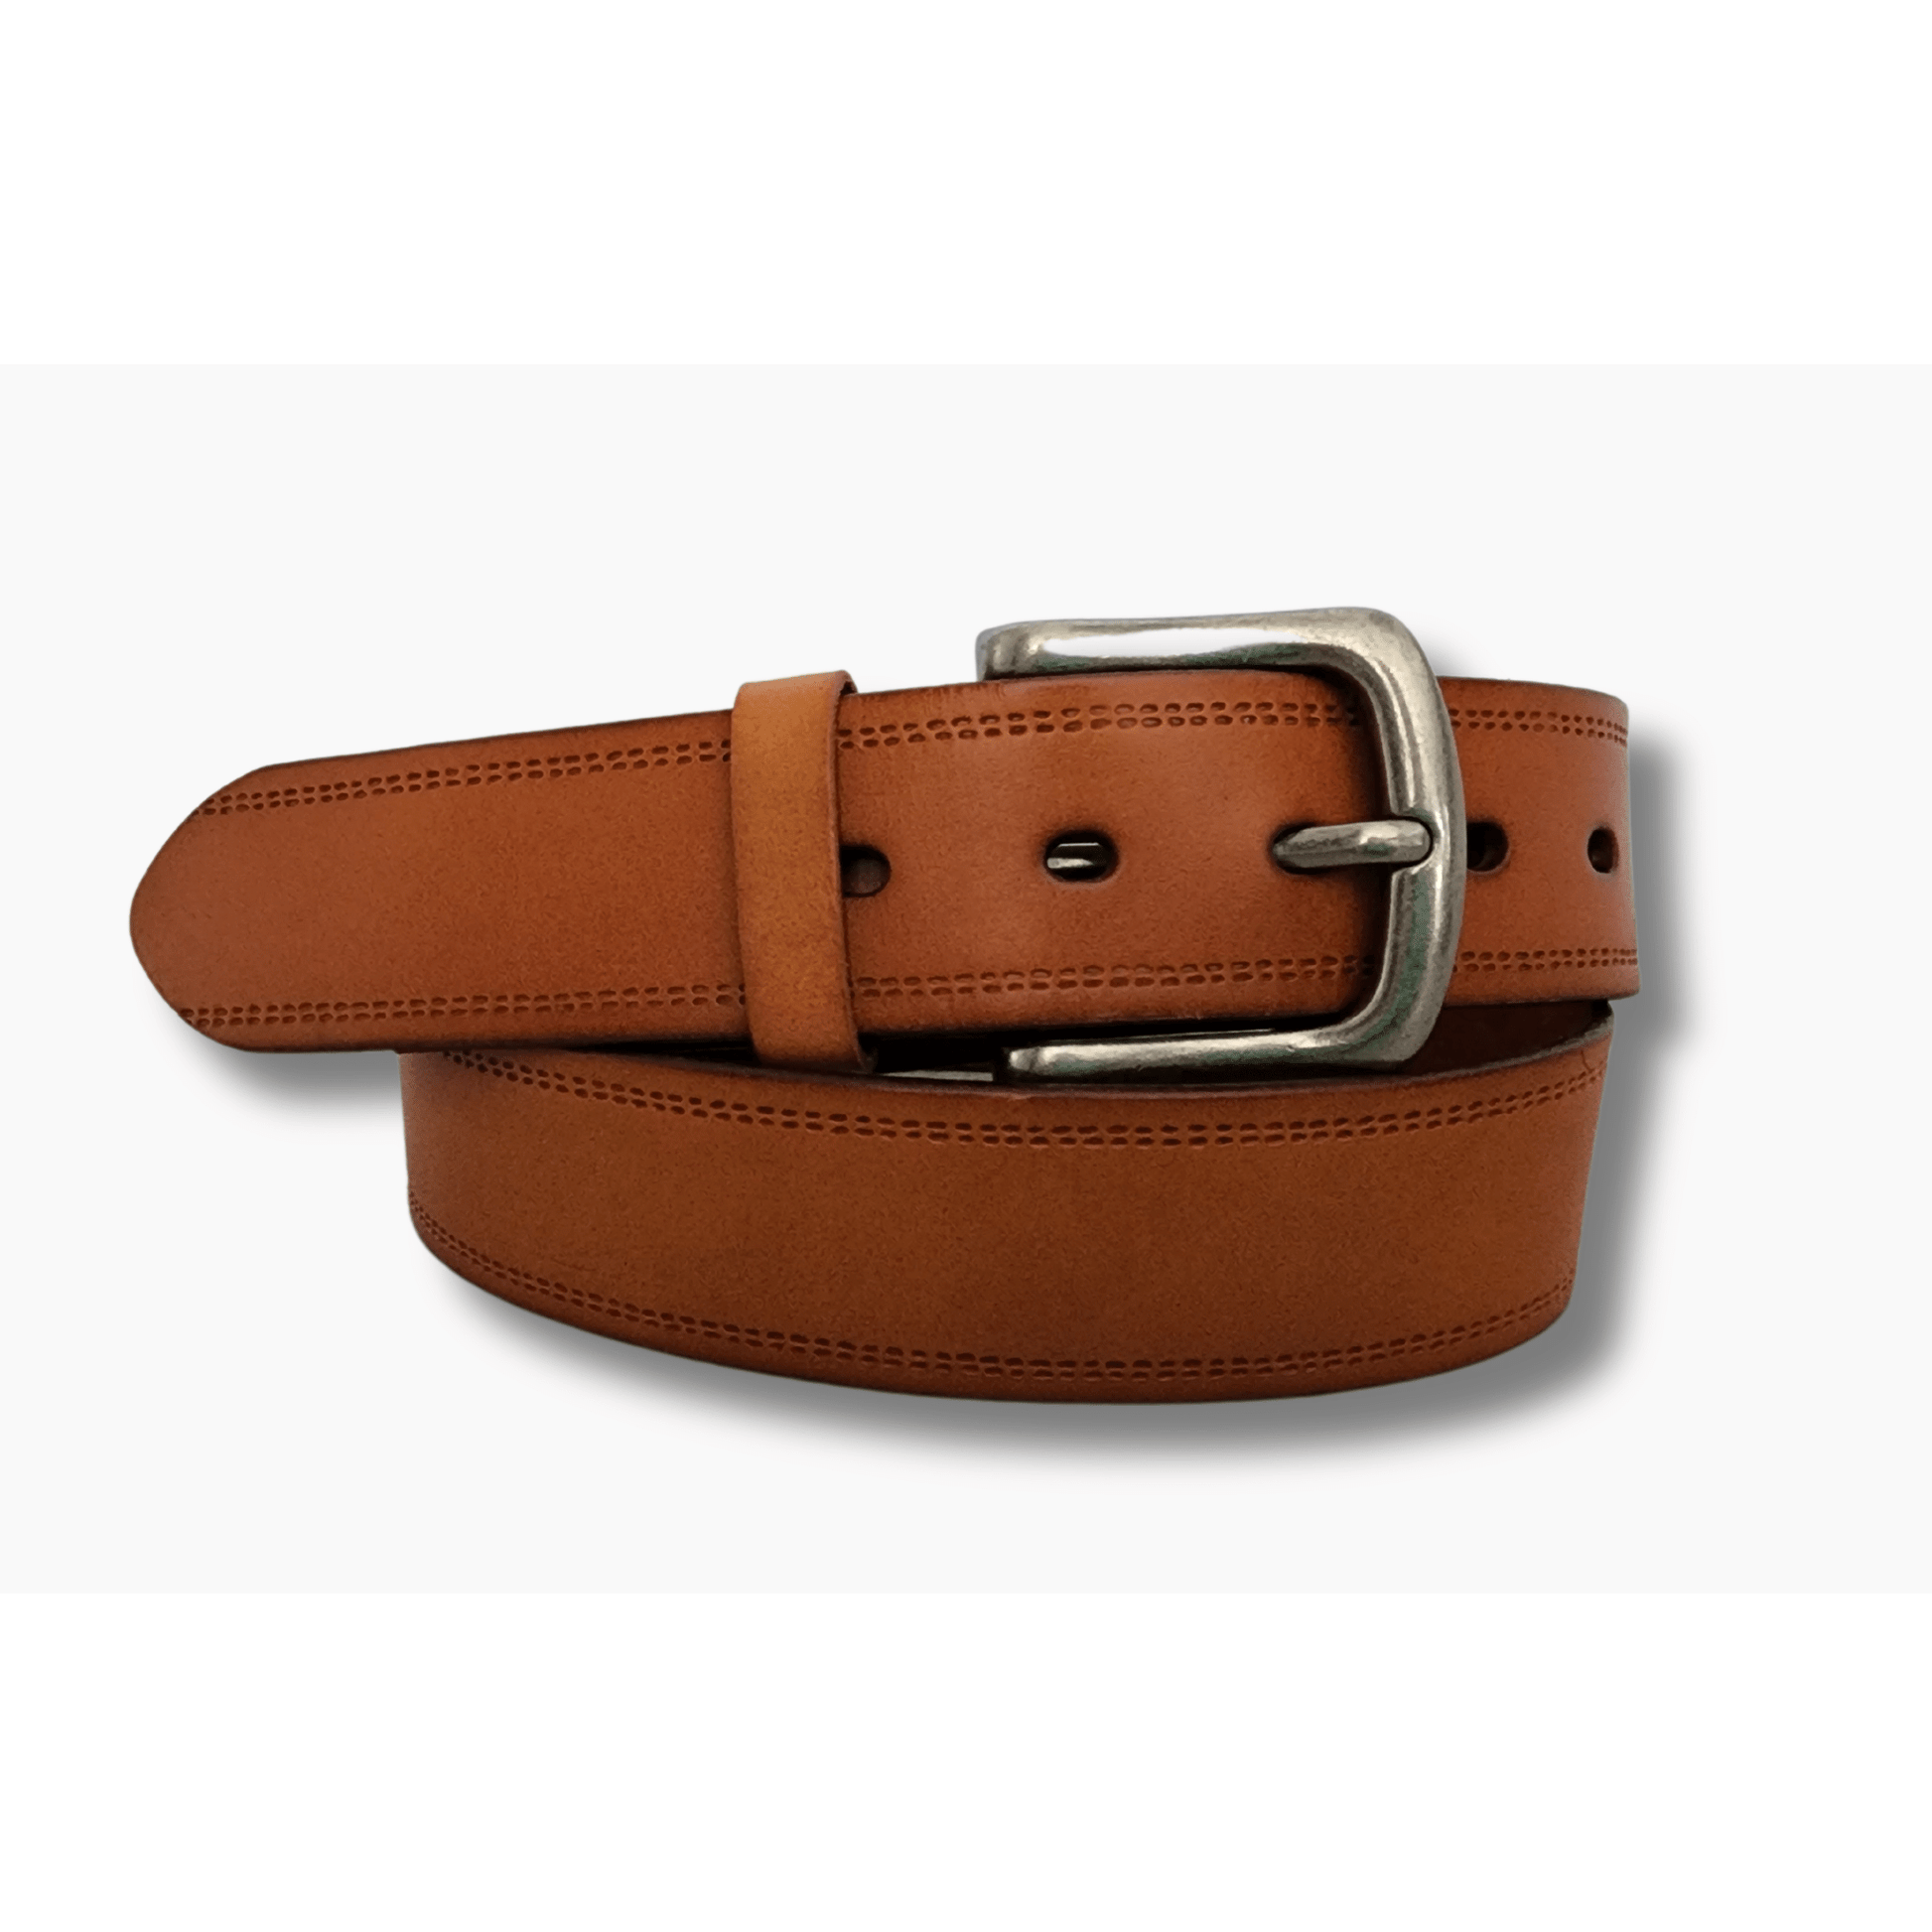 Tan leather belt -38mm wide, available in XXL sizes